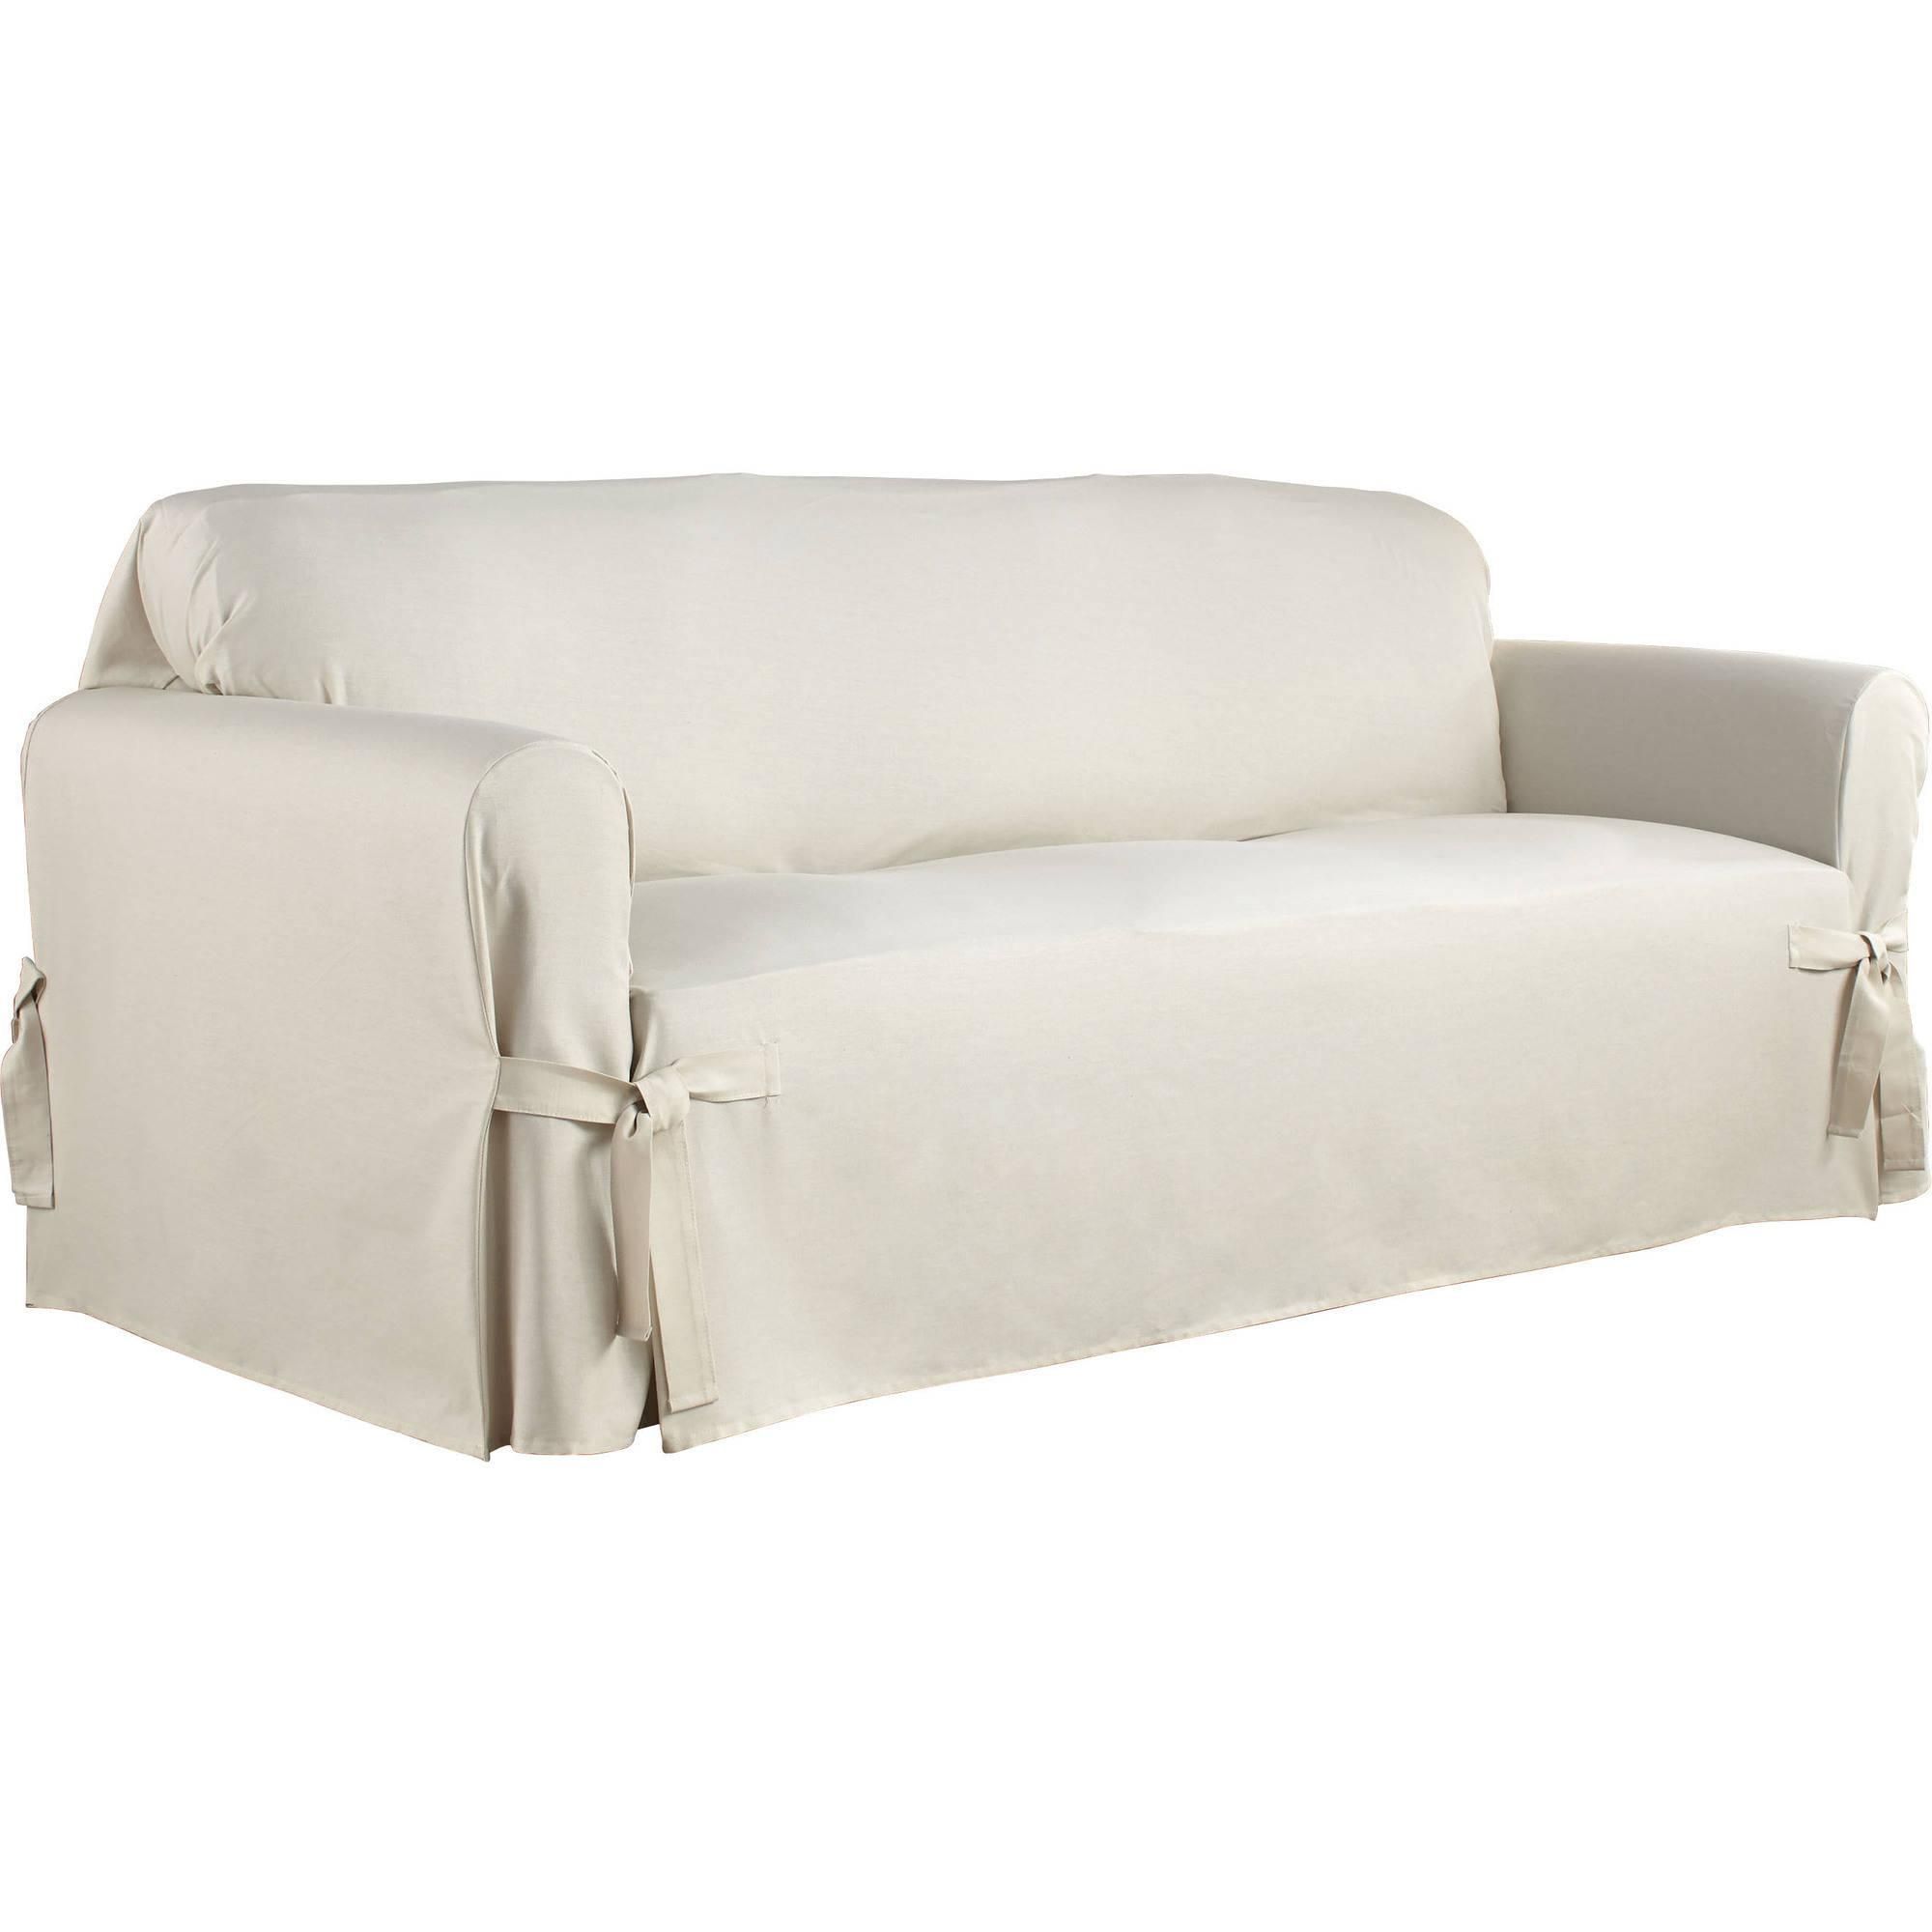 Furniture: Wingback Chair Slipcovers | Couch Slip Cover | Couch Intended For Slip Covers For Love Seats (View 10 of 20)